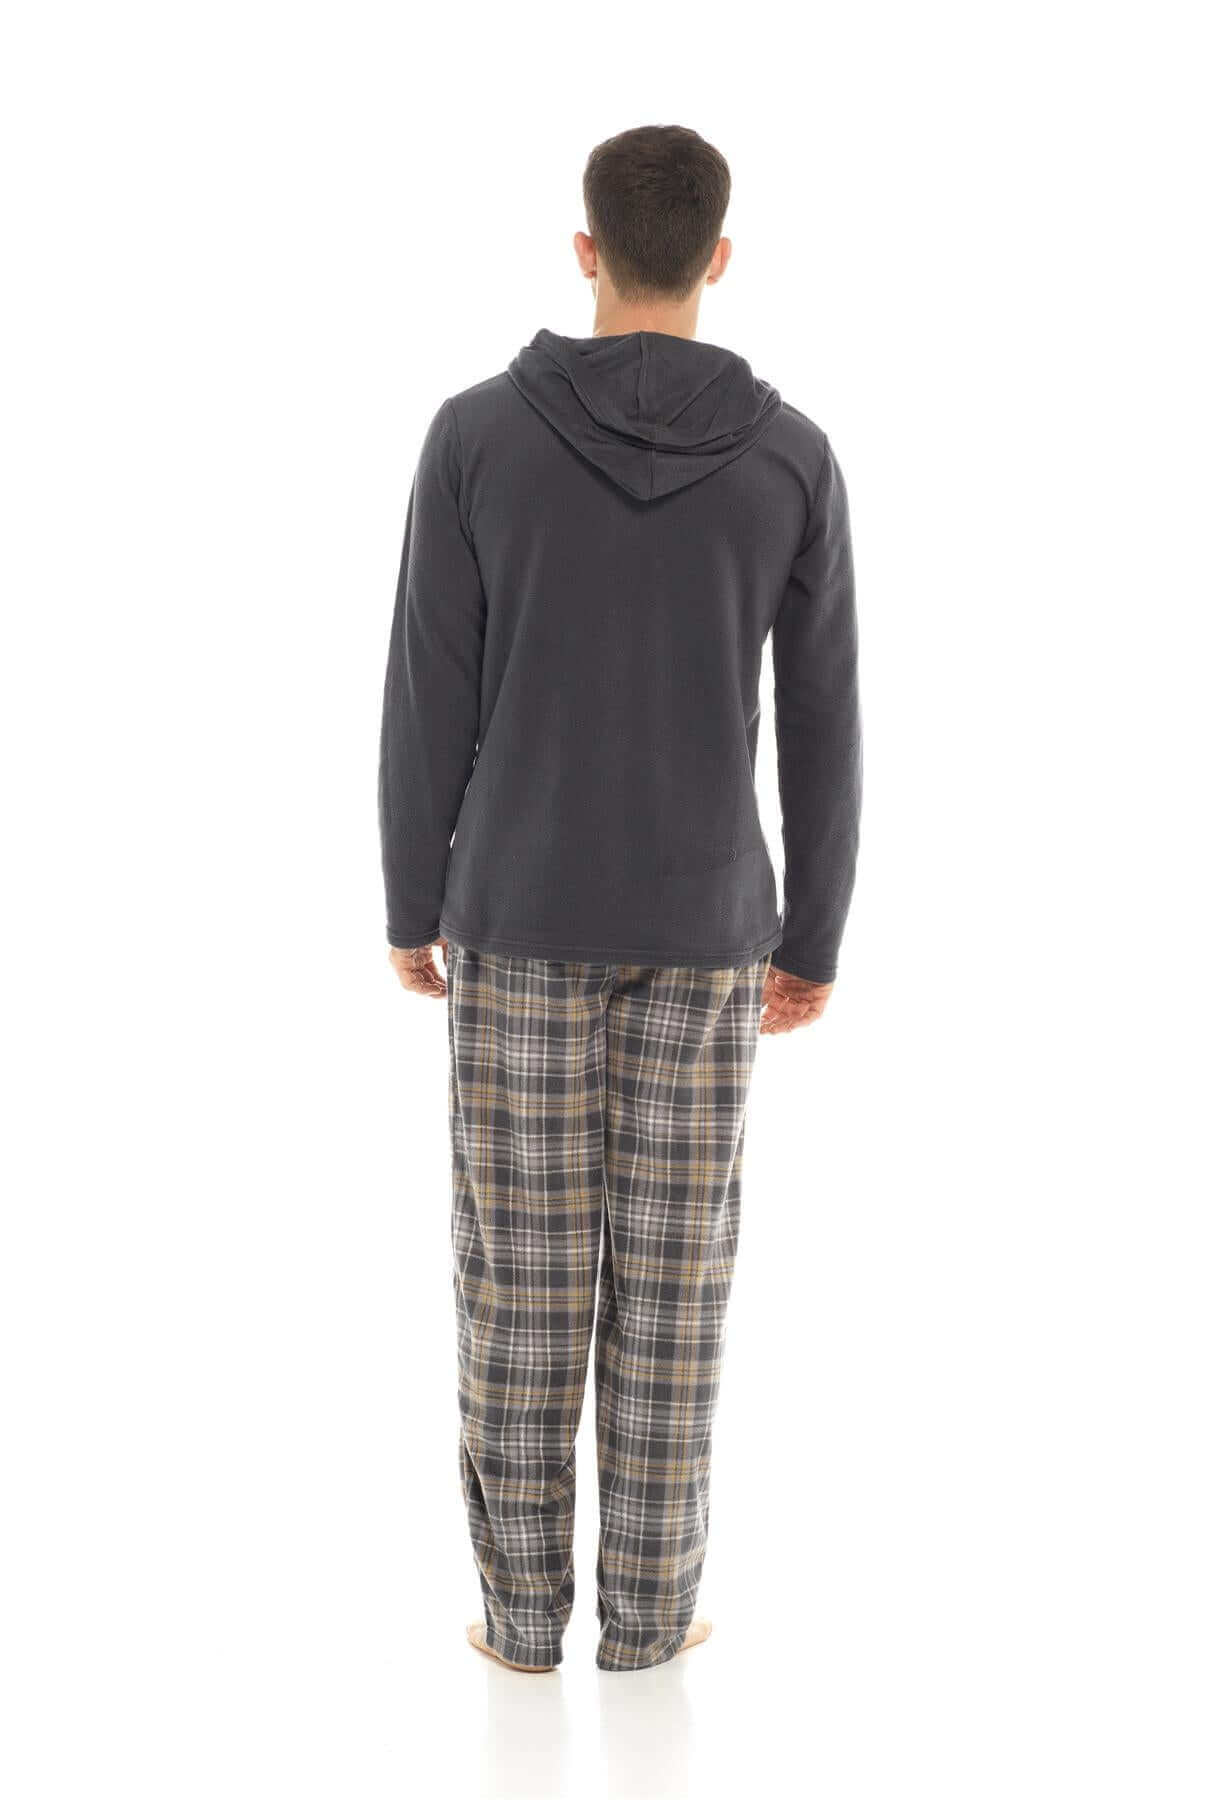 Men's Hooded Check Fleece Pyjama Set With Check Bottoms Warm Winter PJ Sets. Buy now for £20.00. A Pyjamas by Sock Stack. athletics, bottom, boys, charcoal, check, clothing, comfortable, fleece, fluffy, formal wear, grey, hooded, hoodie, hotel, indoor, la